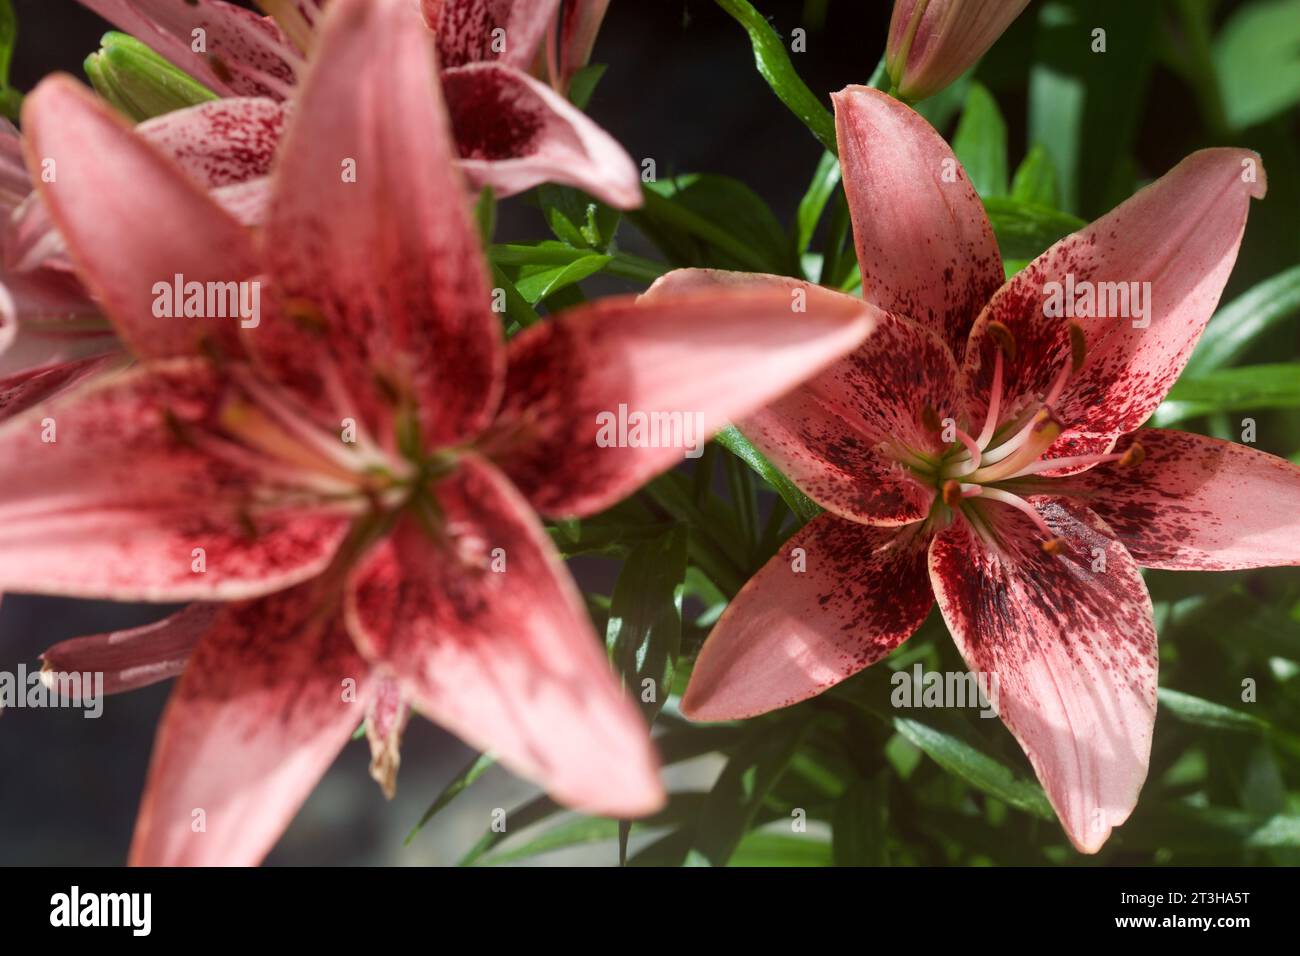 Crimson lilies in bloom seen up close Stock Photo